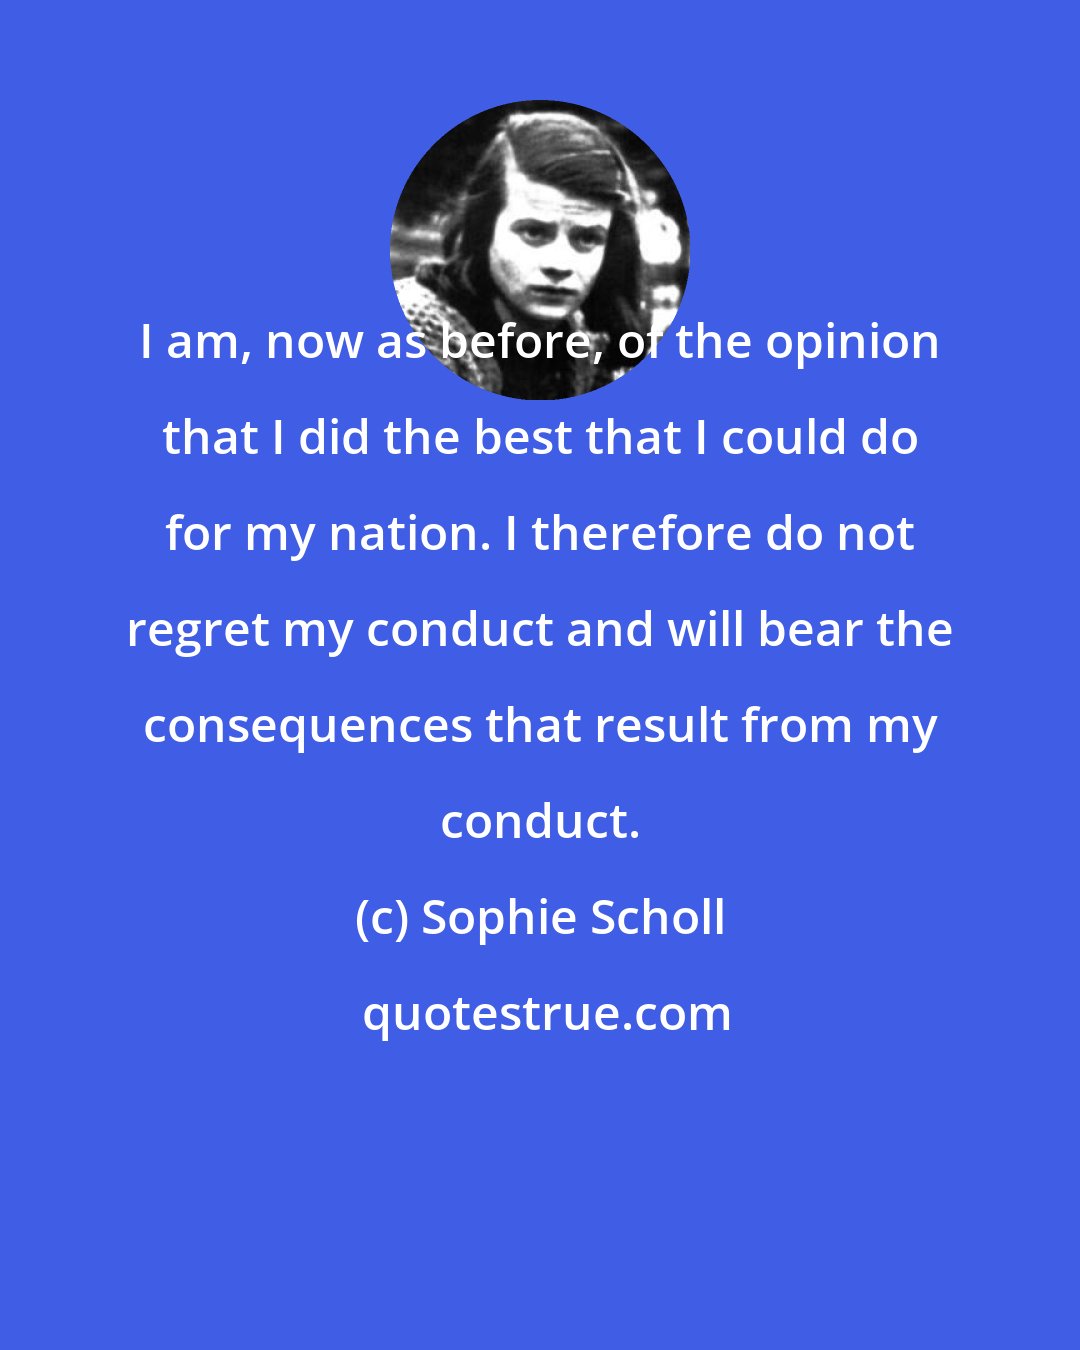 Sophie Scholl: I am, now as before, of the opinion that I did the best that I could do for my nation. I therefore do not regret my conduct and will bear the consequences that result from my conduct.